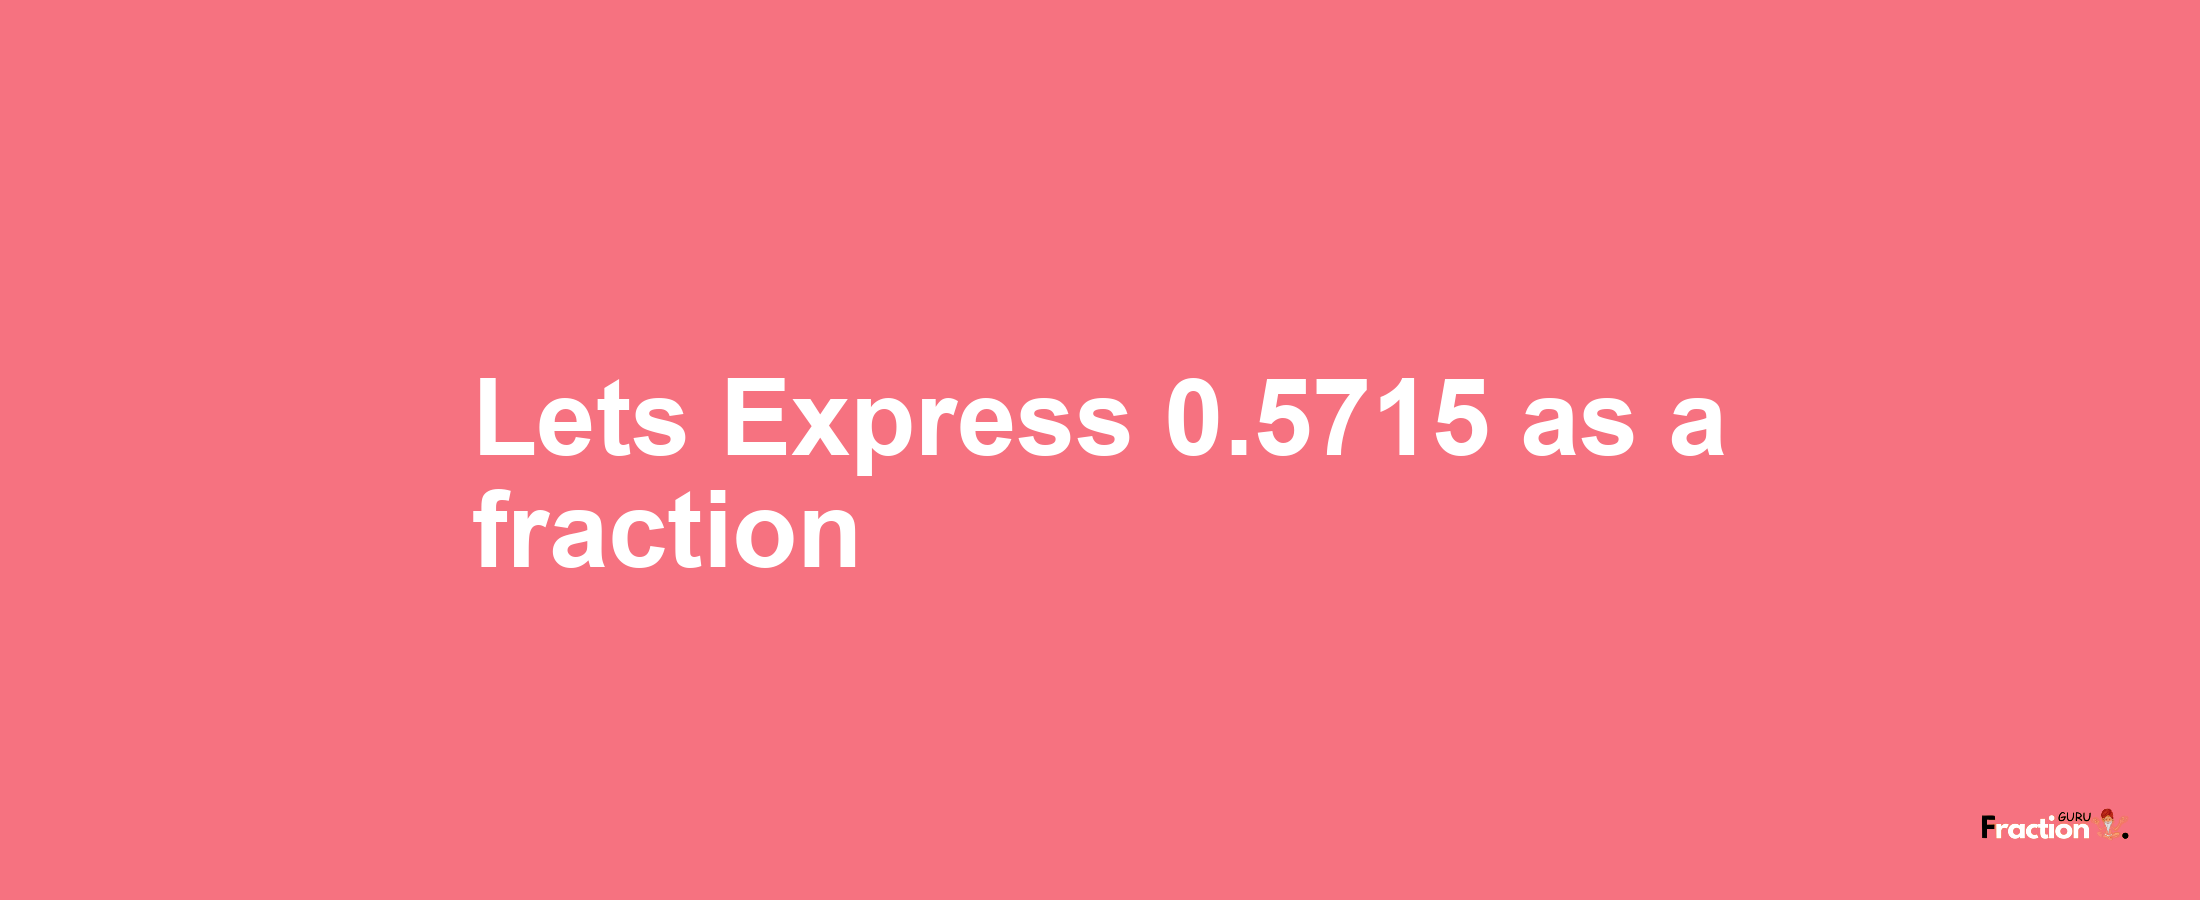 Lets Express 0.5715 as afraction